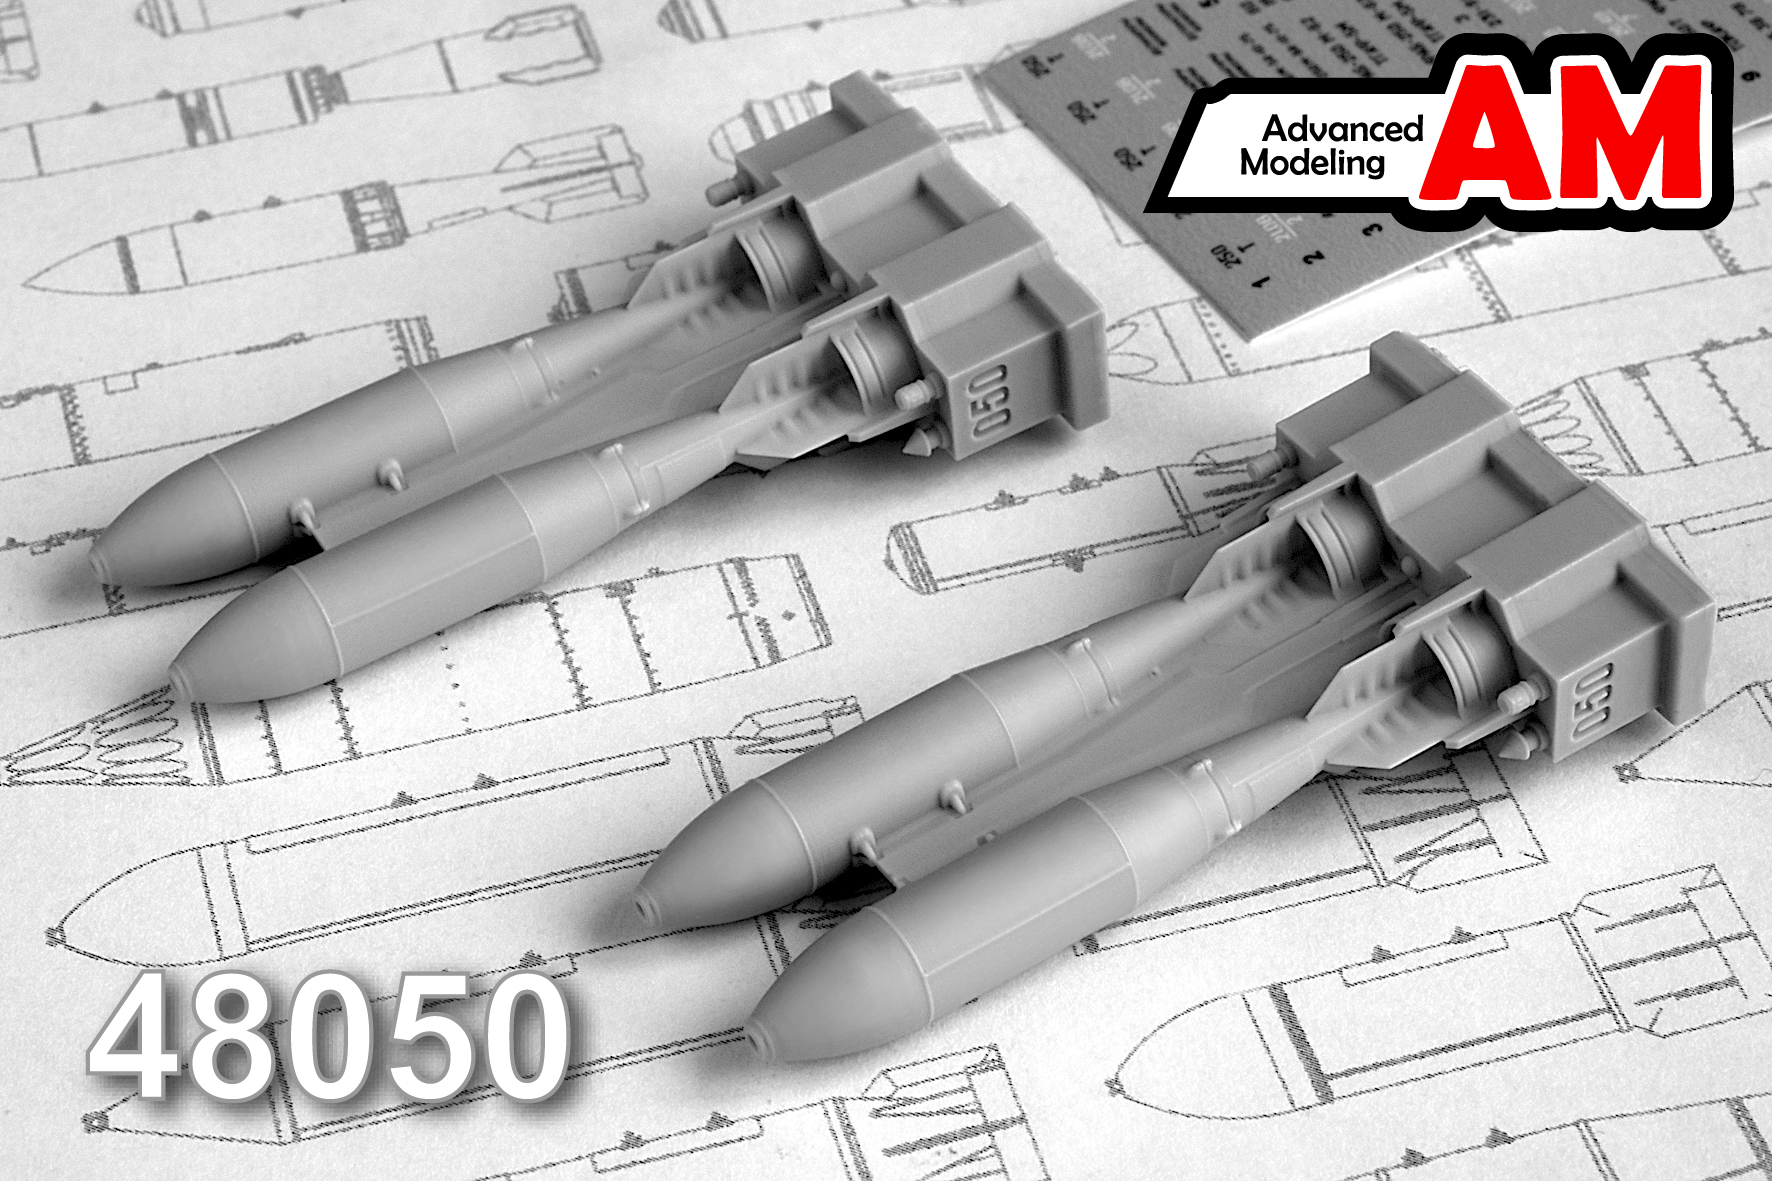 Additions (3D resin printing) 1/48 FAB-250 T 250 kg High-Explosive Fragmentation bomb (Advanced Modeling) 